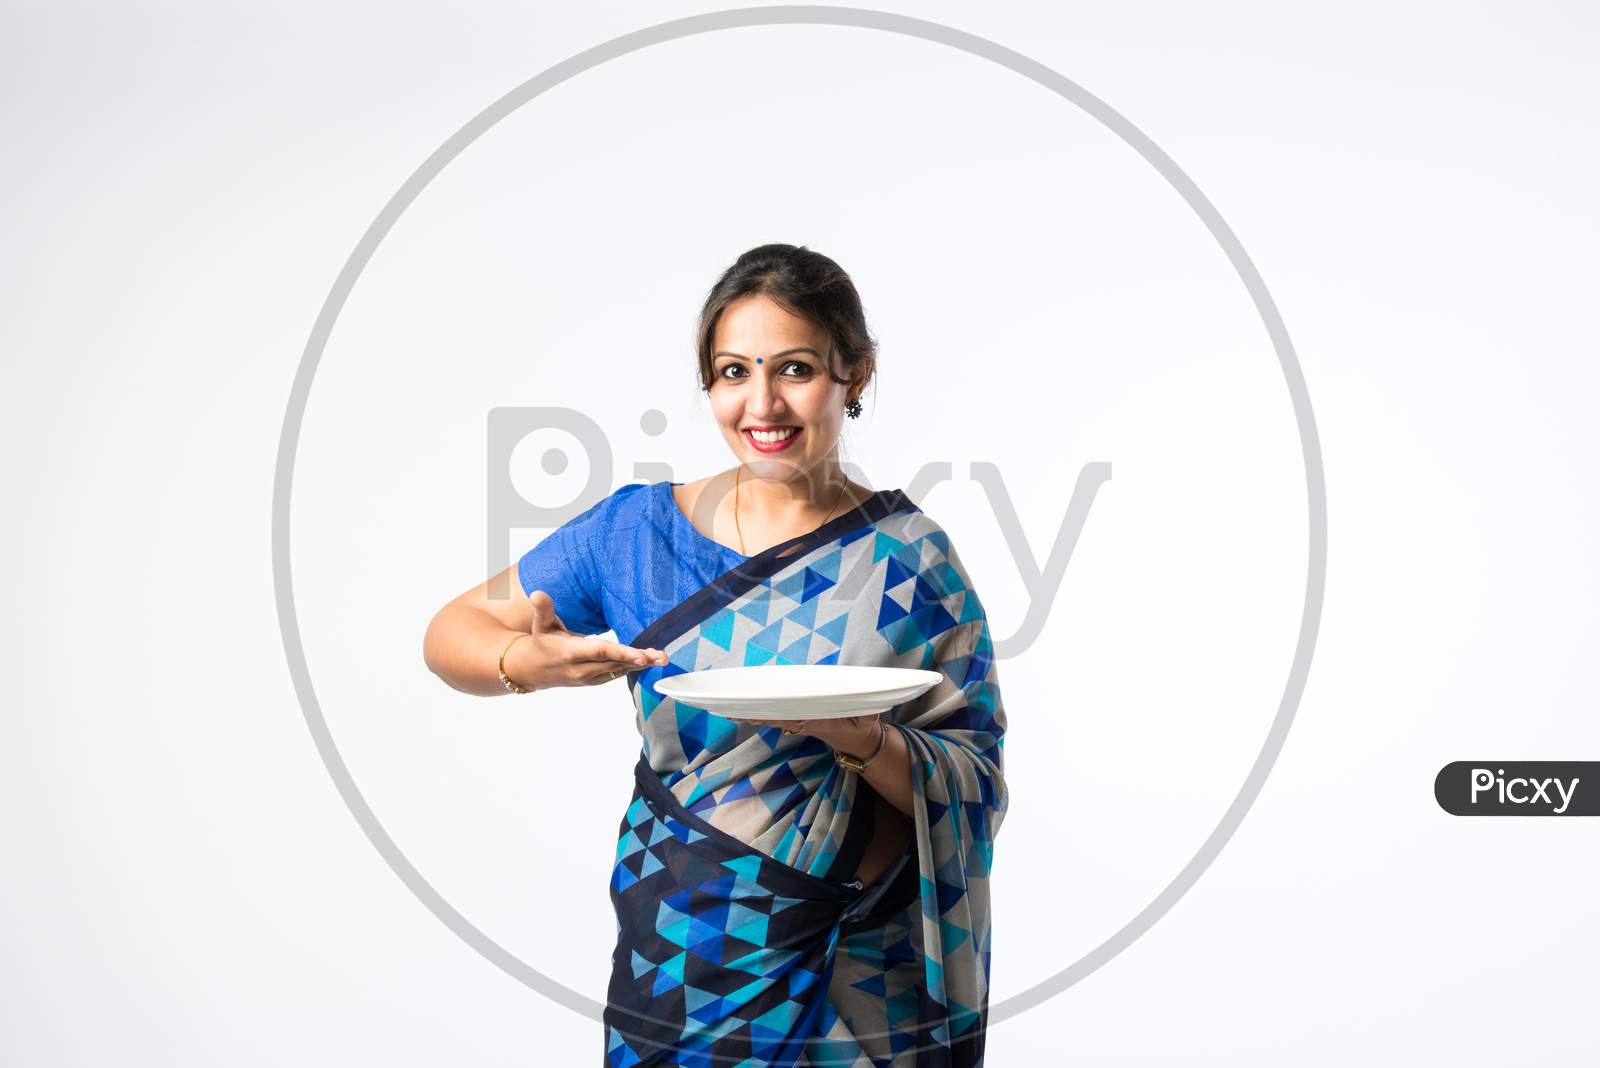 Indian Asian Woman Or Housewife Presenting White Ceramic Plate Or Bowl